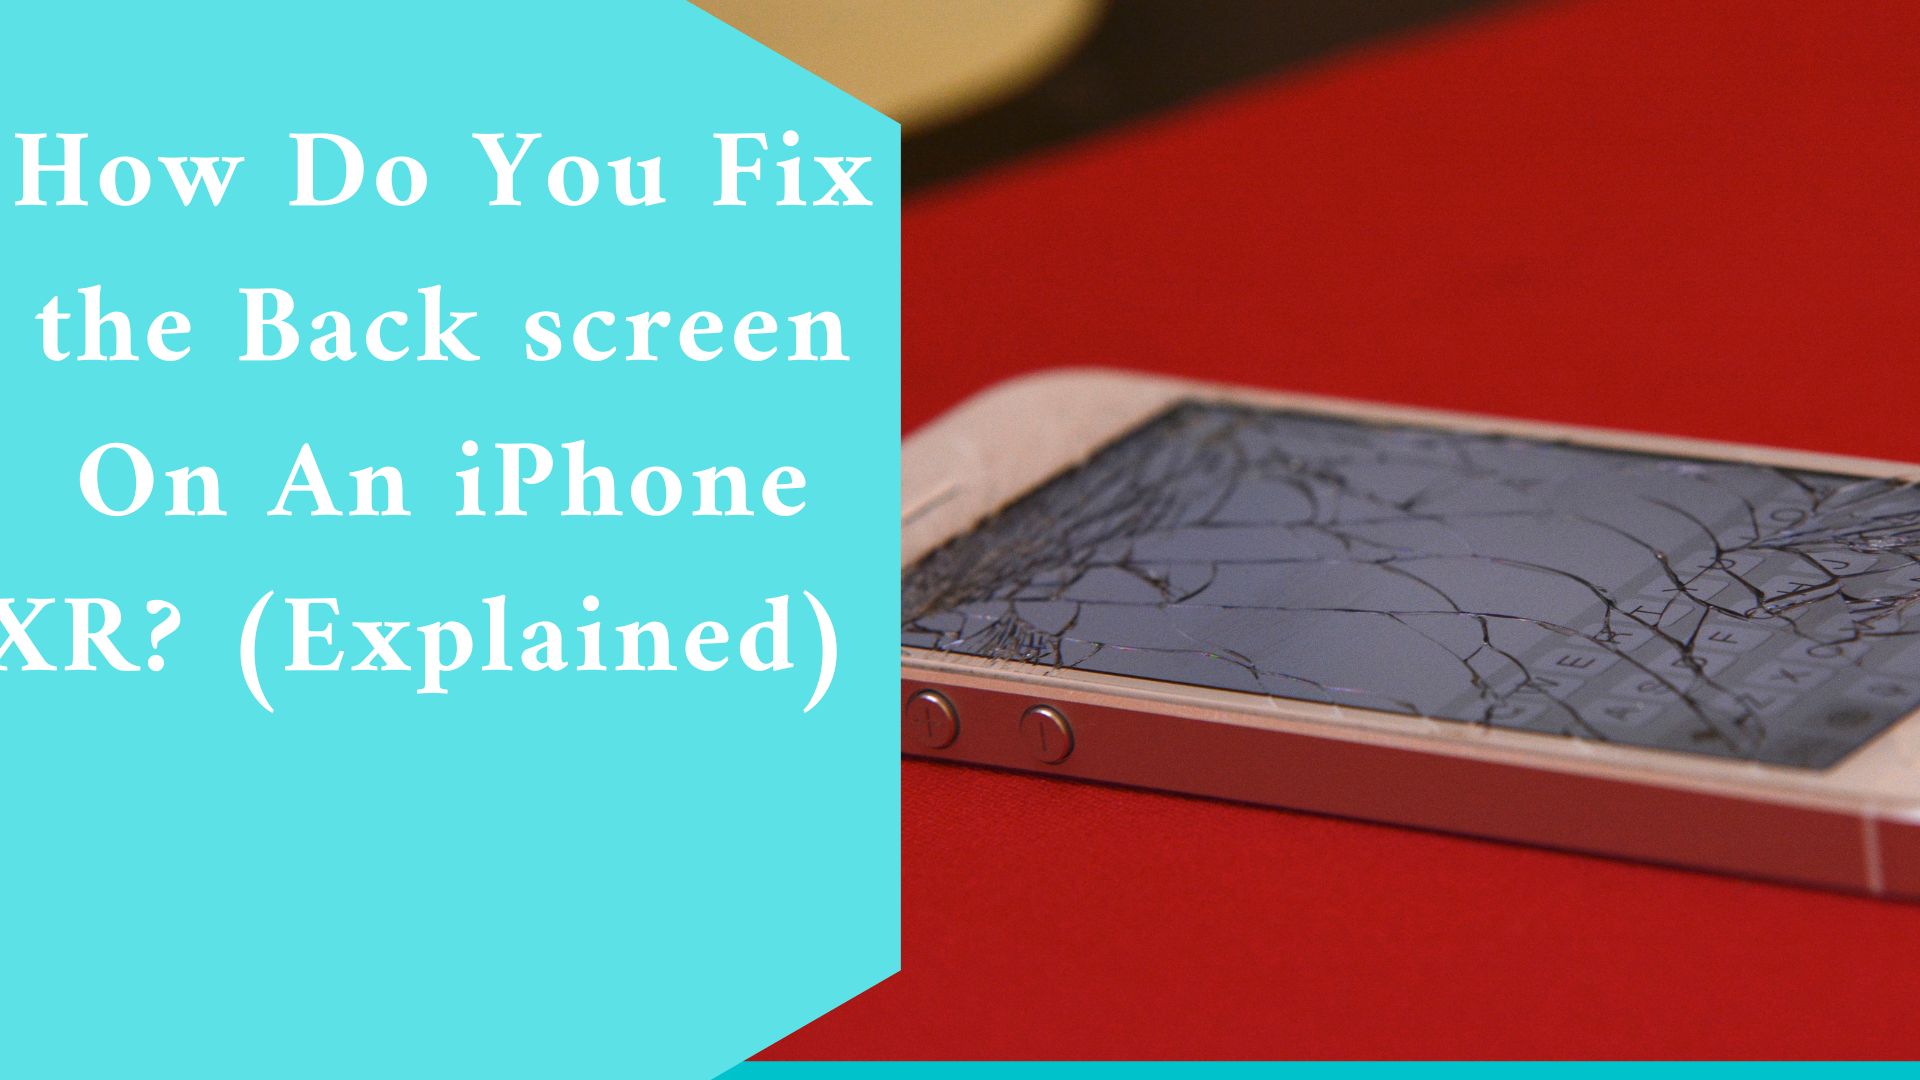 How Do You Fix the Back screen On An iPhone XR? (Explained)